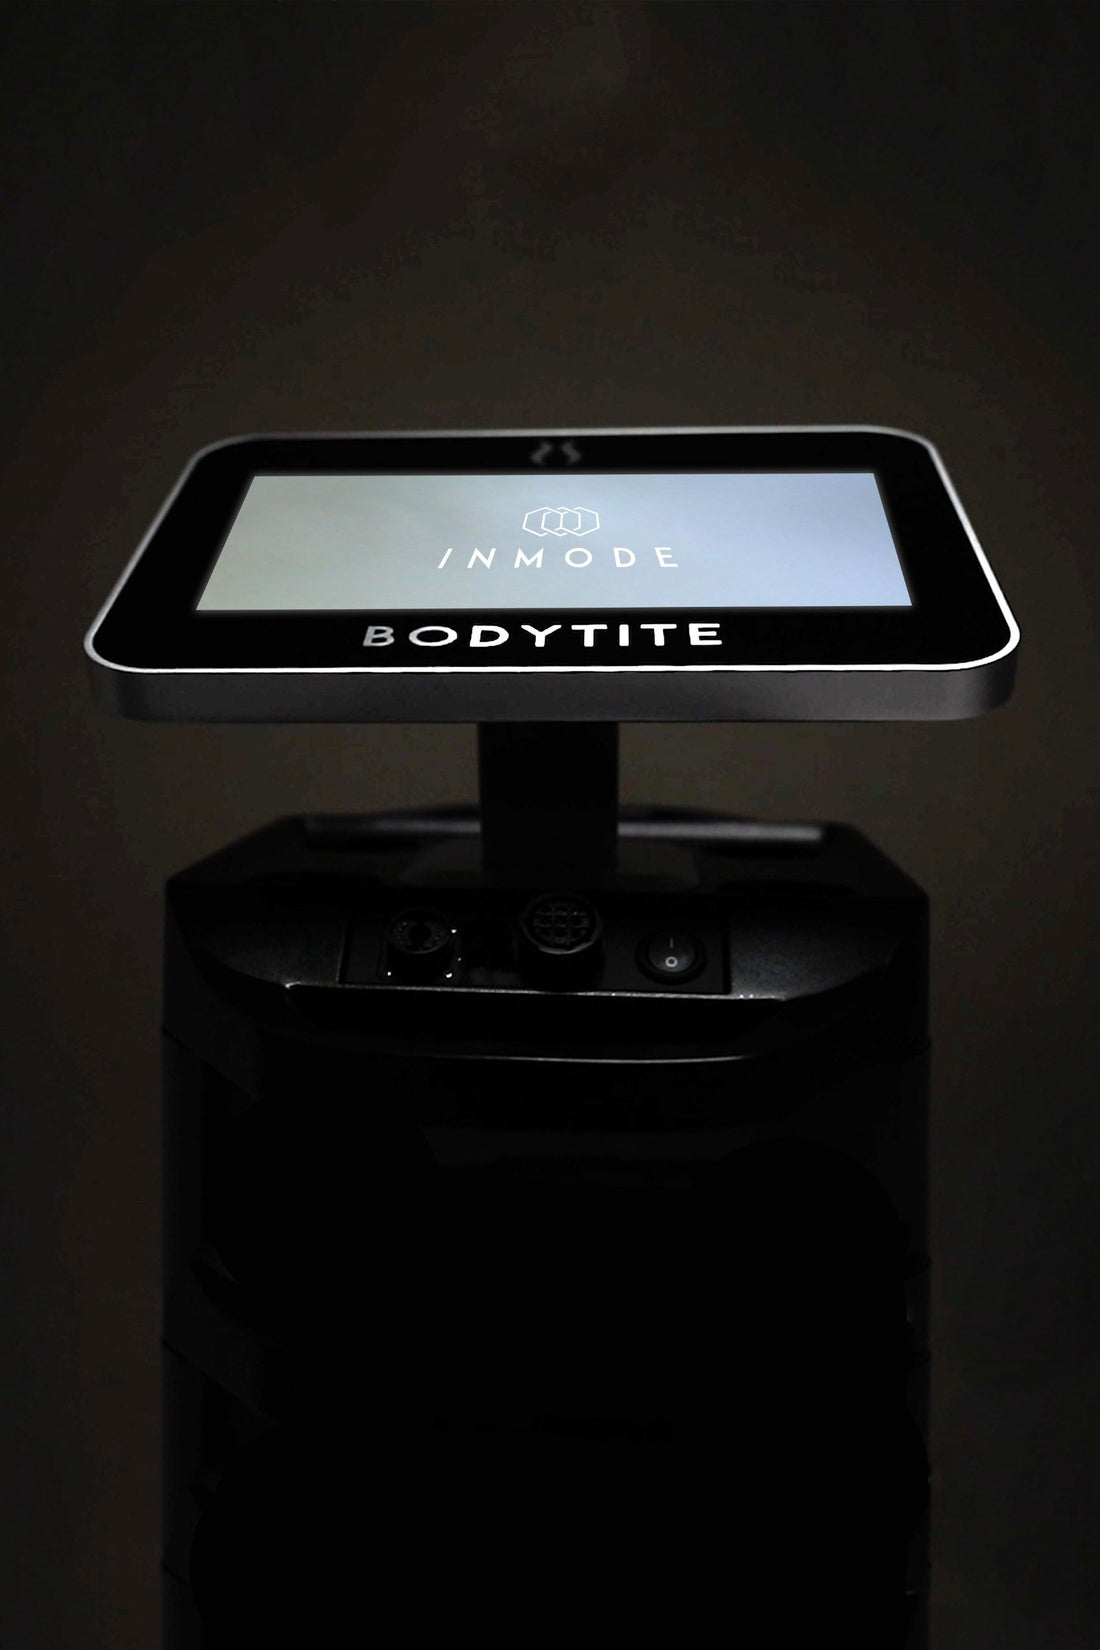 A photo showcases a sleek and modern medical device from the brand &quot;Bodytite&quot; used for body contouring, with an illuminated digital touchscreen labeled &quot;InMode&quot; on top. The rest of the device remains dark, emphasizing its advanced radiofrequency technology.